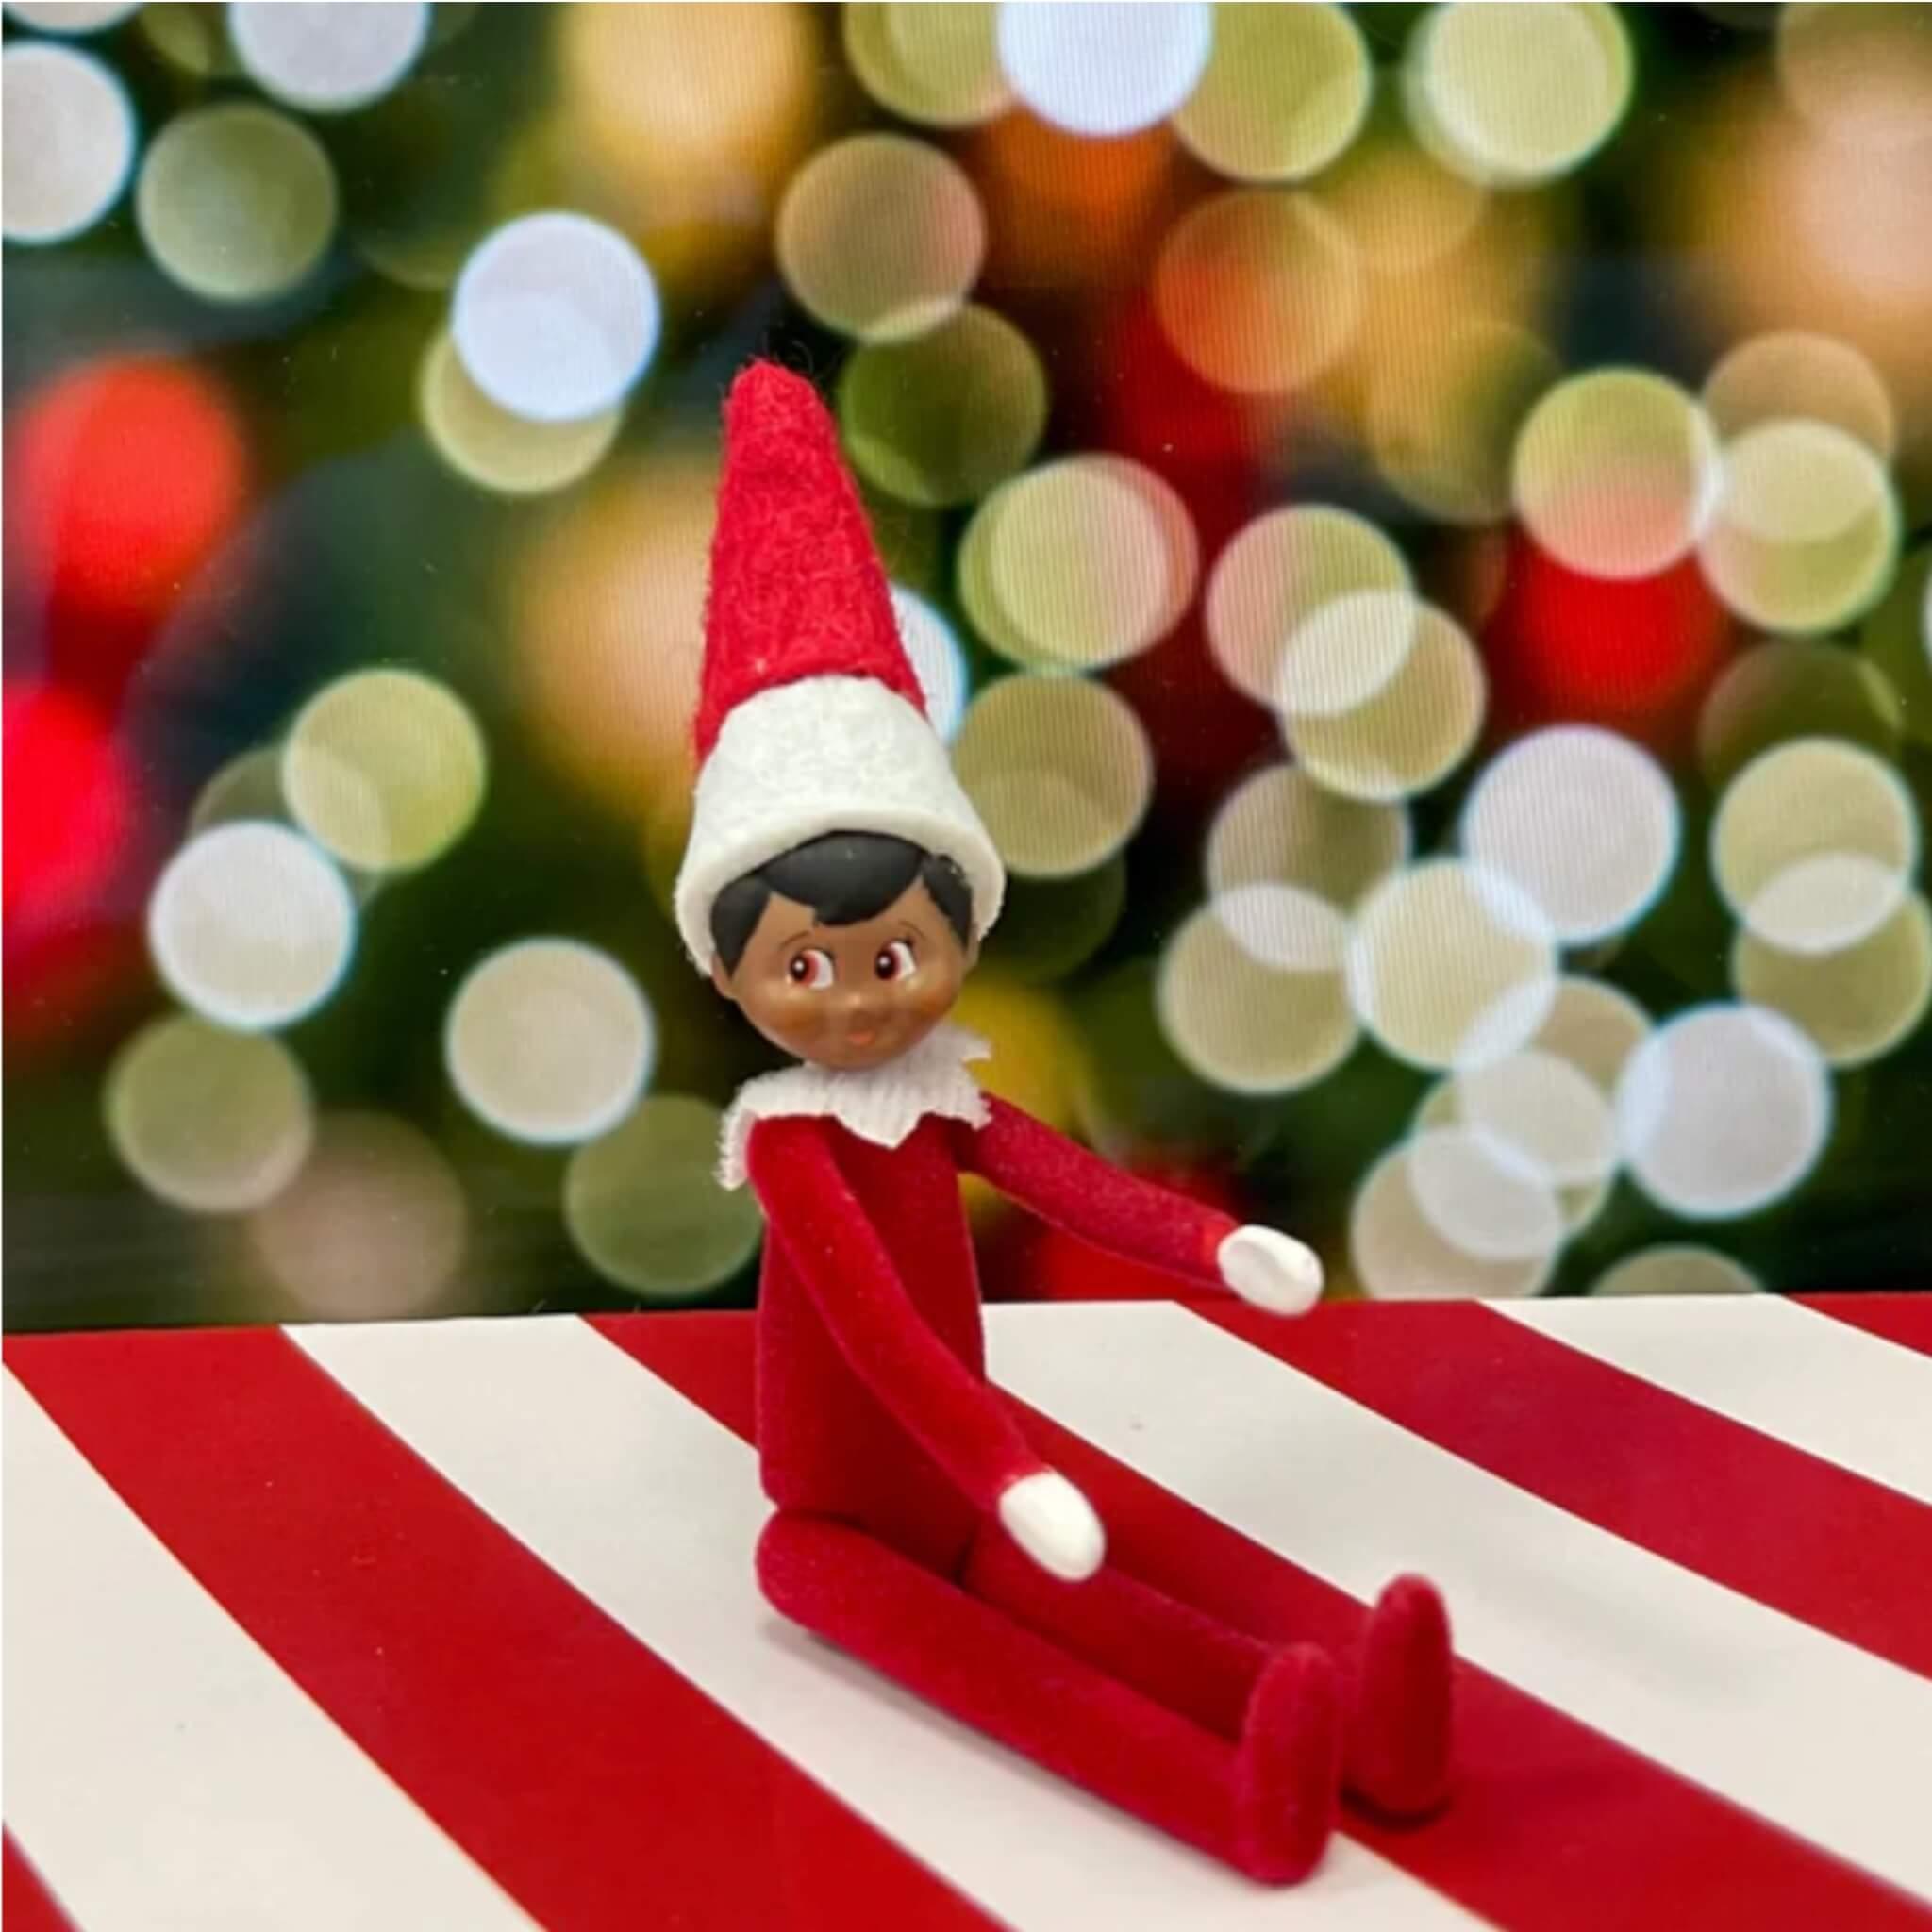 The-Worlds-Smallest-Elf-on-the-Shelf